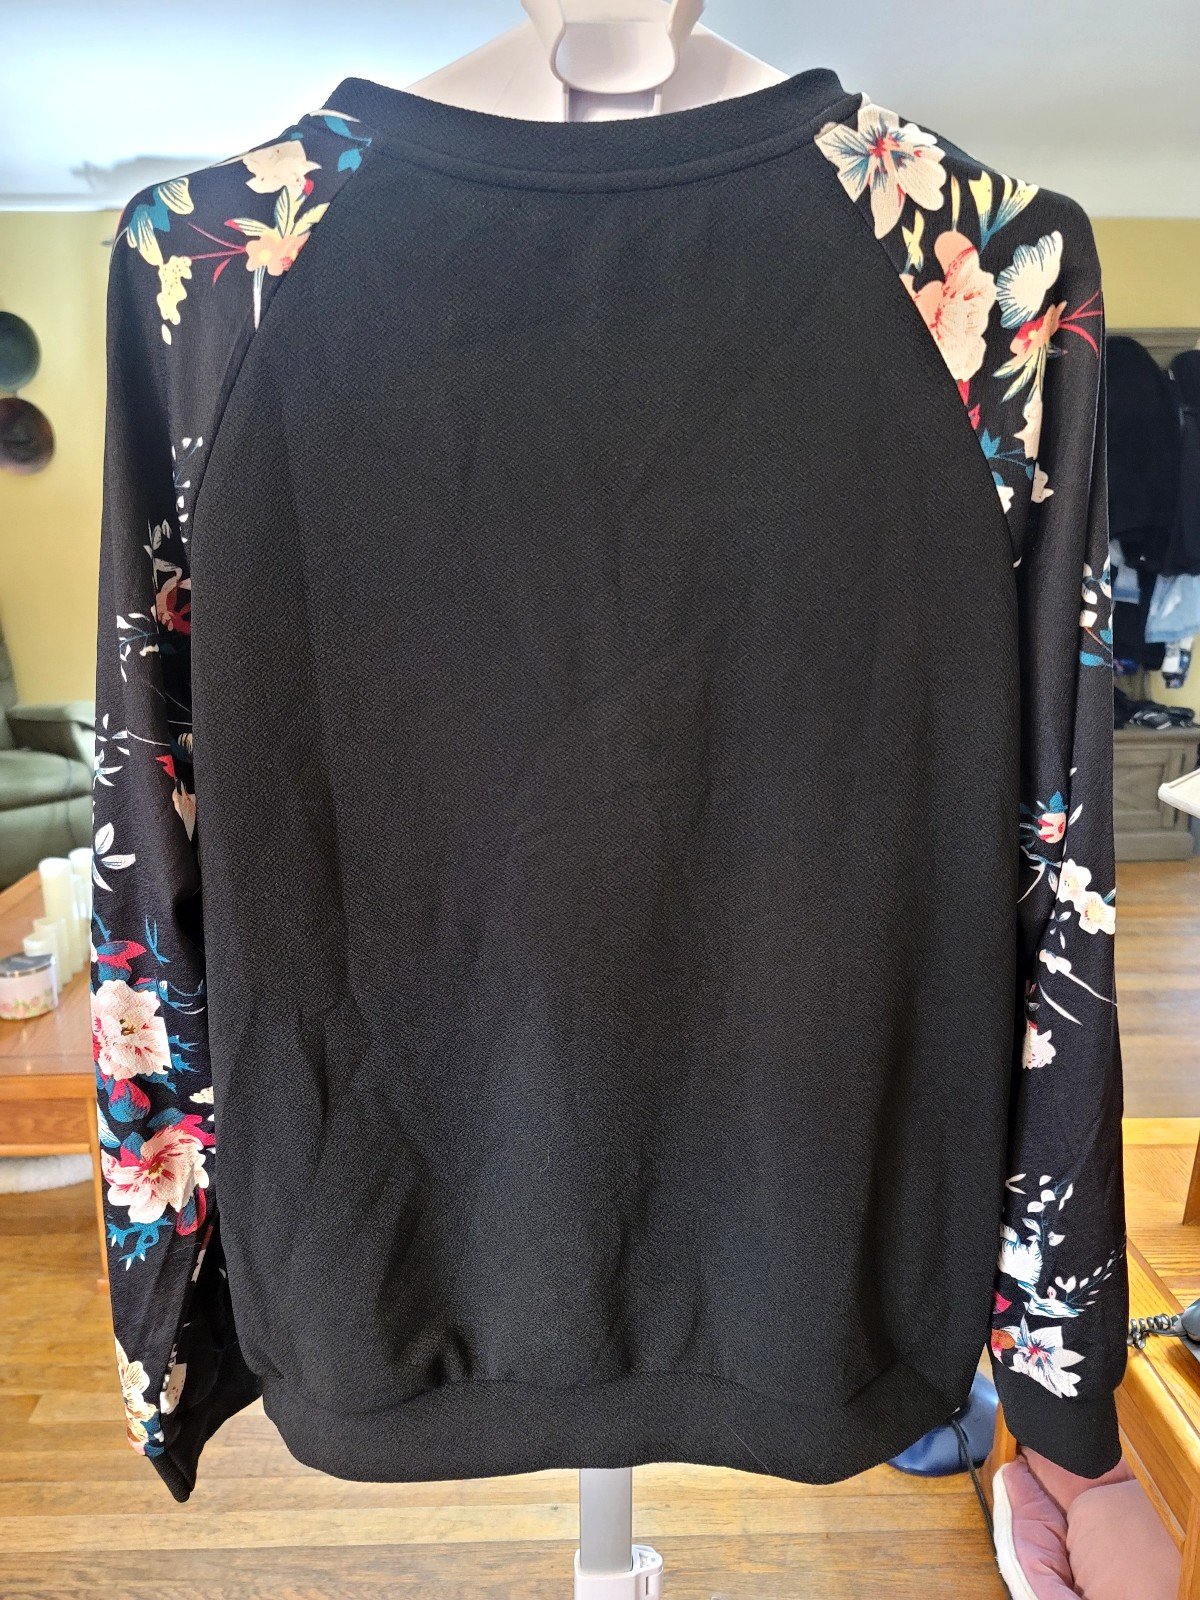 save up to 70% NWOT Women´s Floral Sweatshirt,  Size Large lQke9dNNO Cool